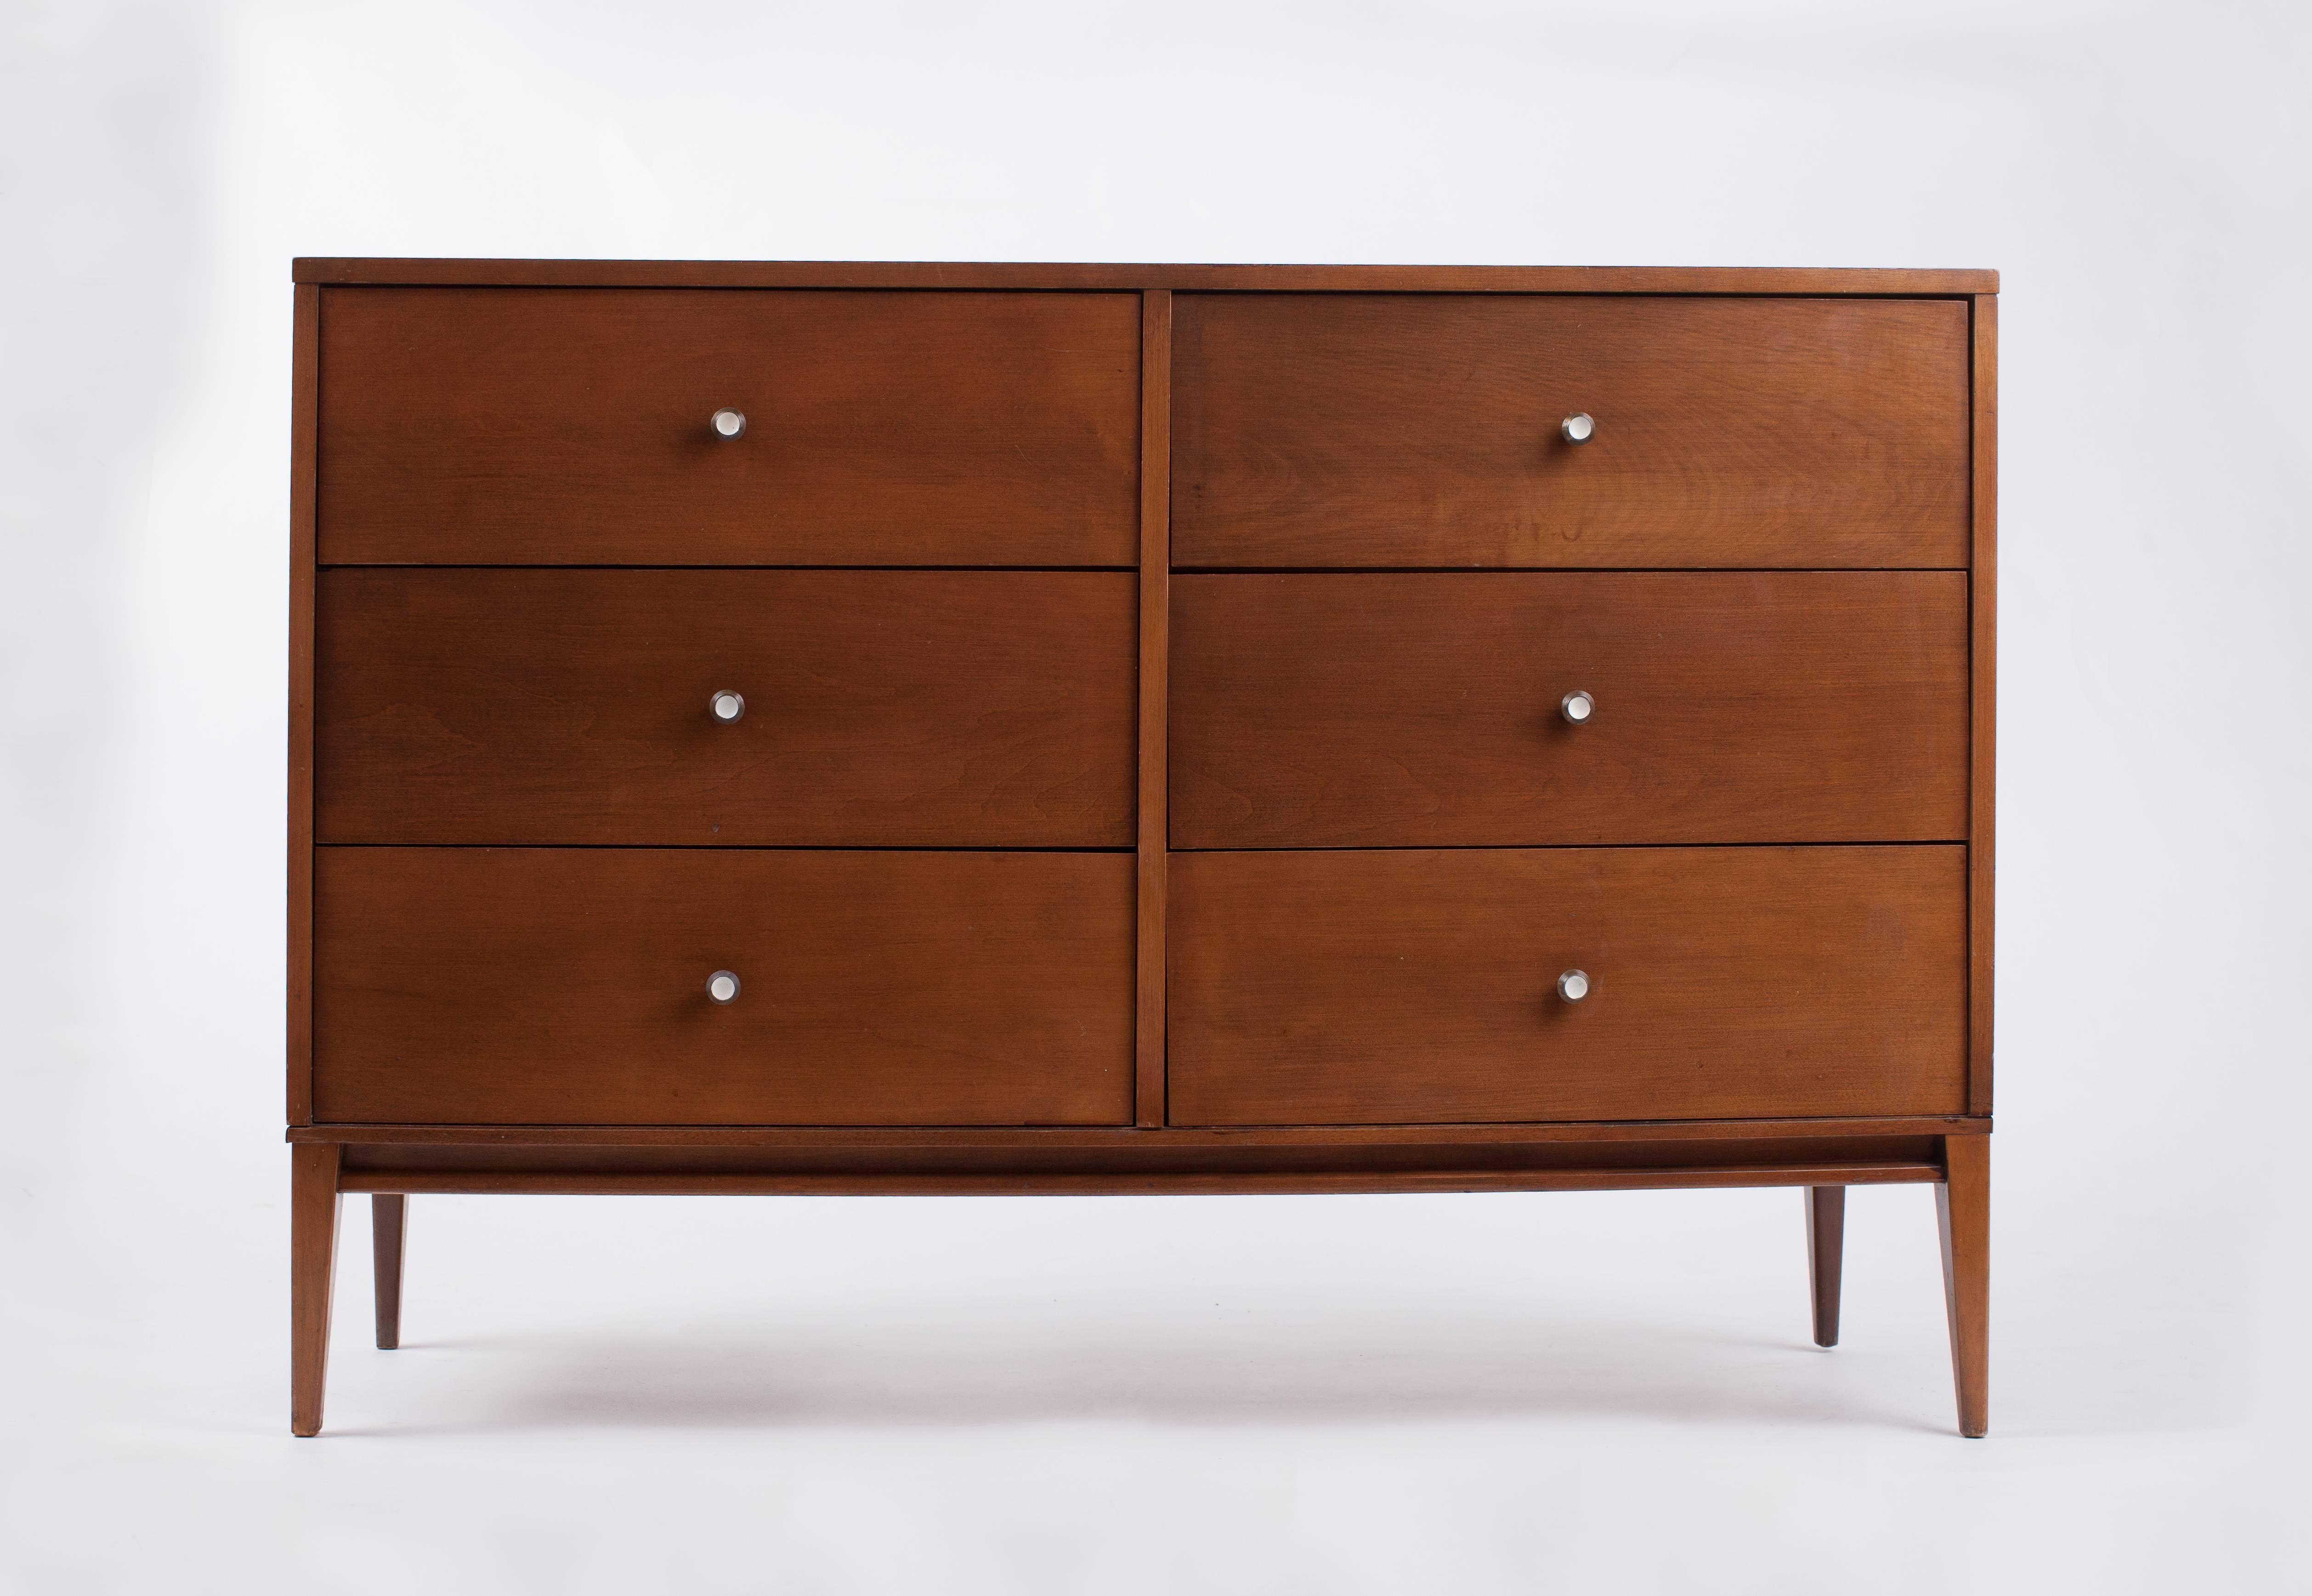 Paul McCobb (1917–1969)

Clean-lined six-drawer dresser or credenza by Paul McCobb for his Planner Group by Winchendon, with angled and tapered legs, in maple with original conical brass and enamel pulls.

Stamped on inside drawer.